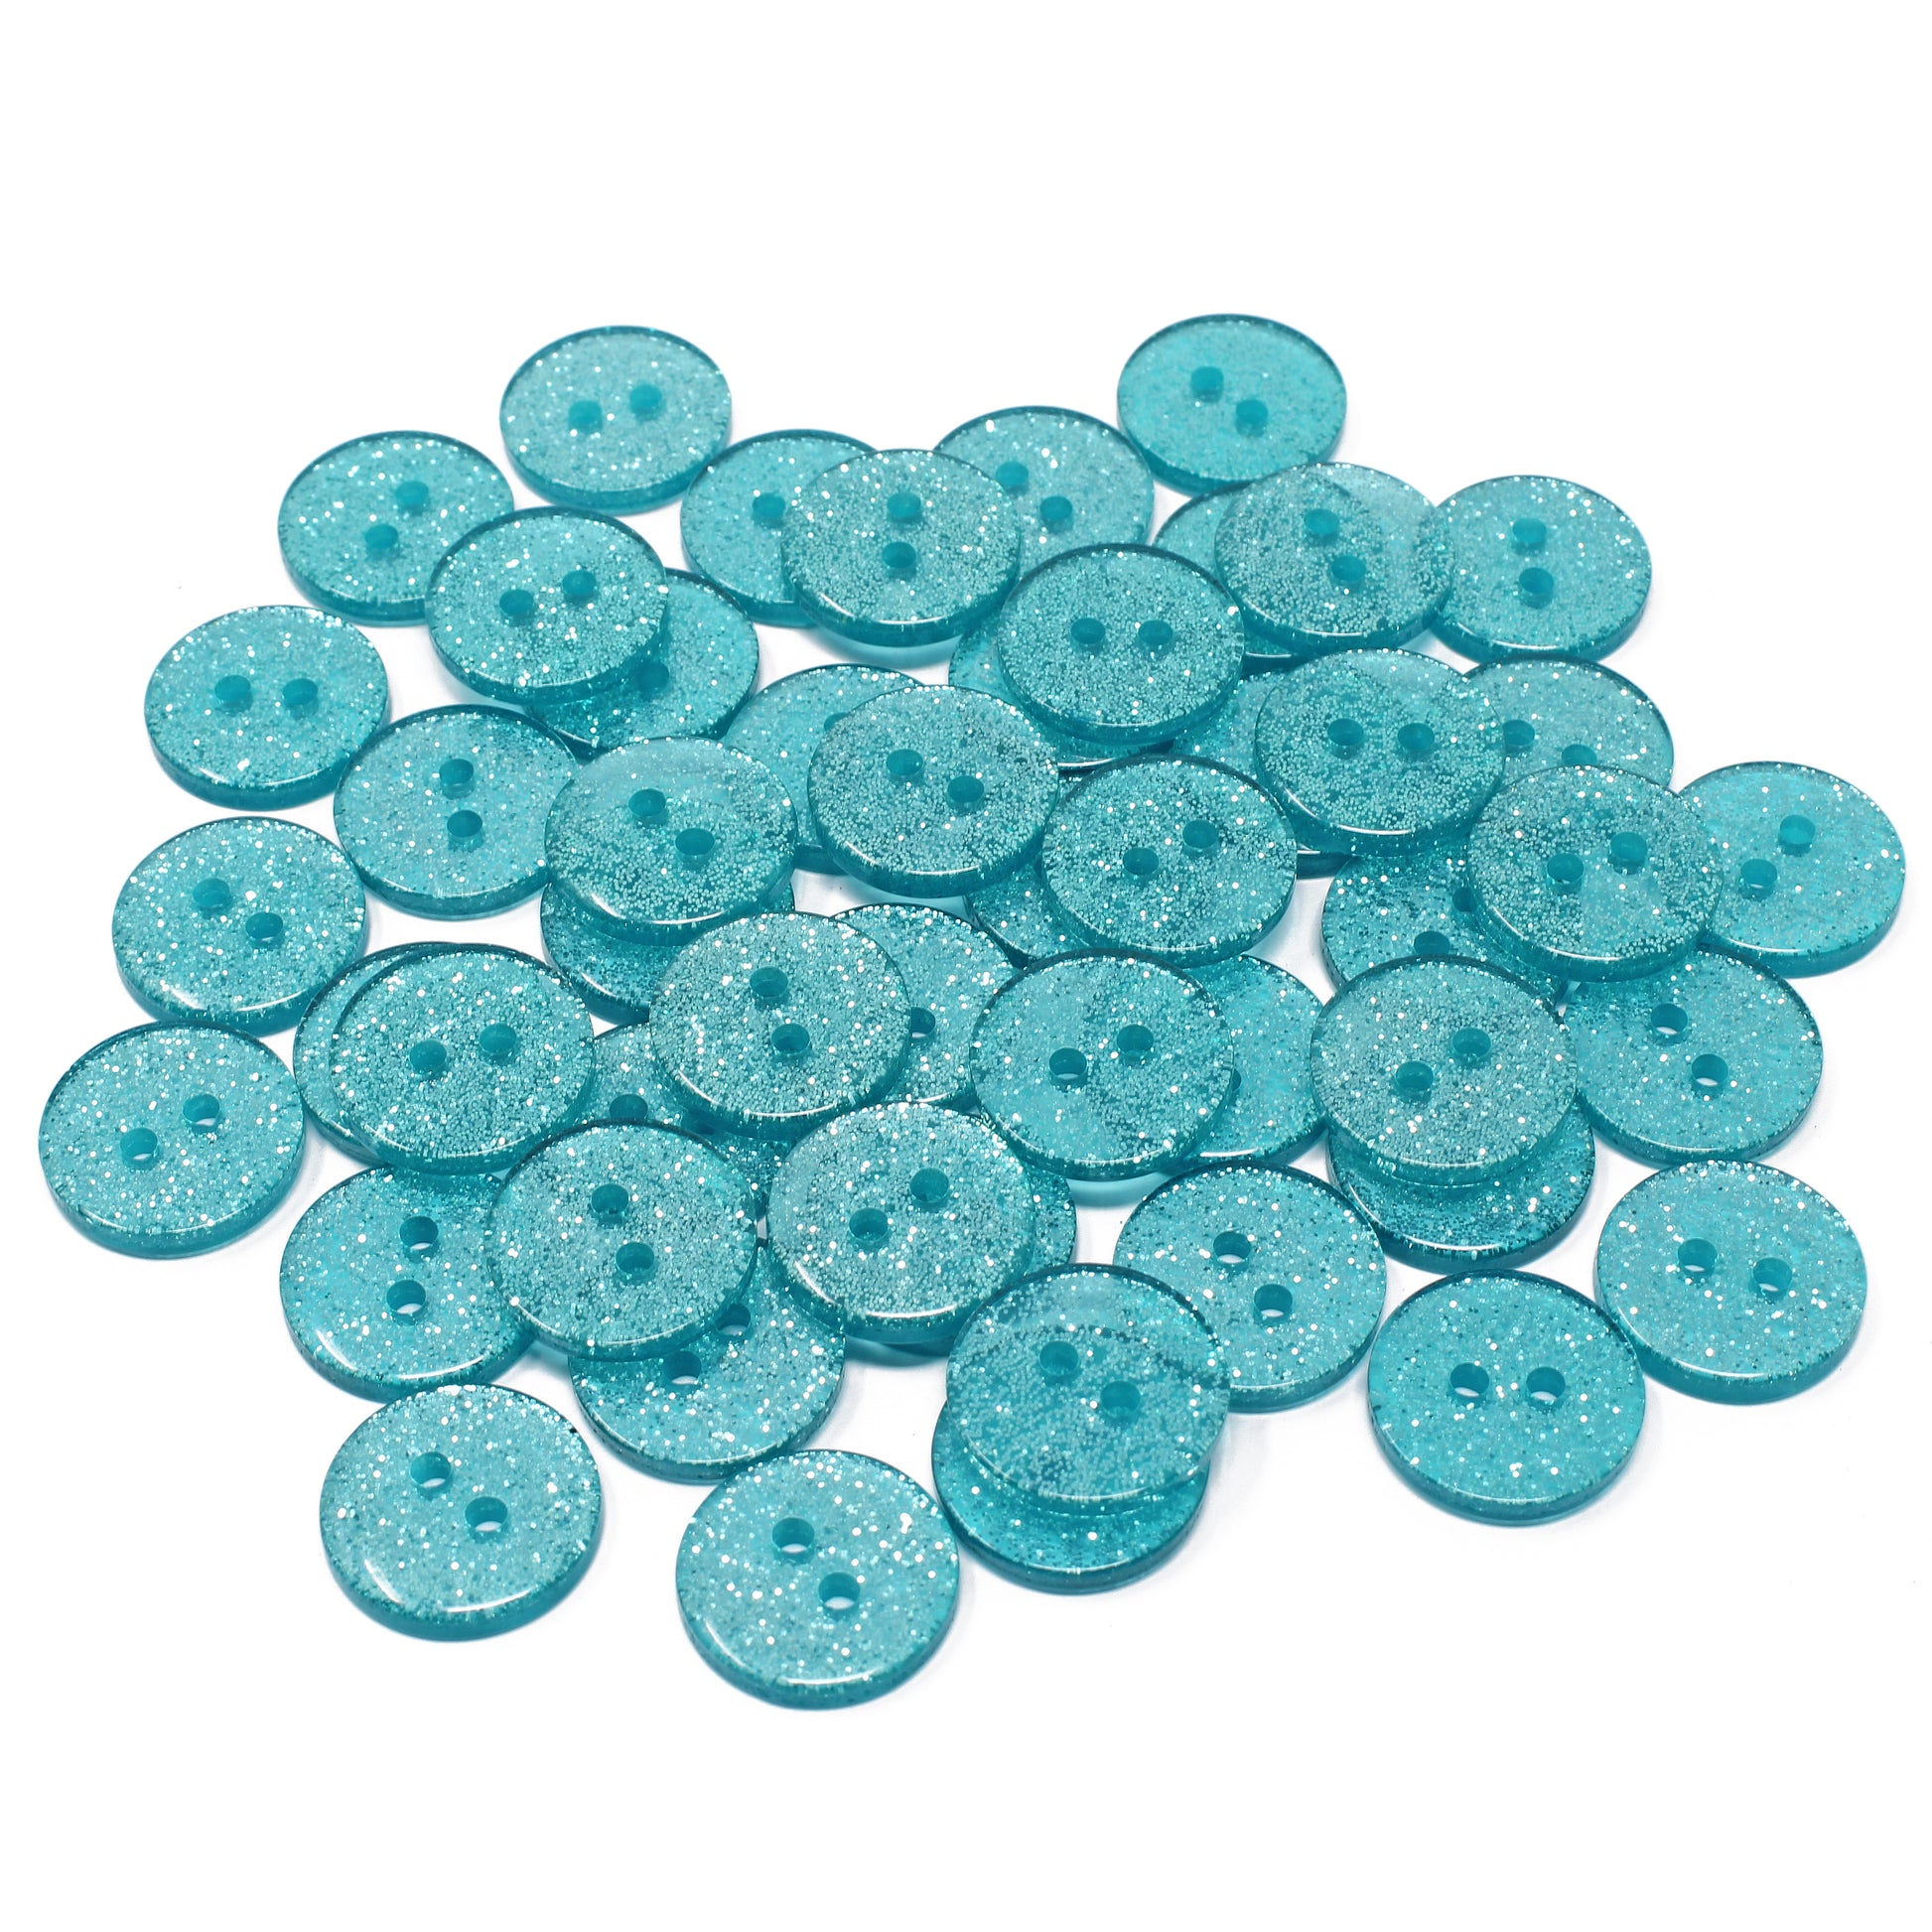 Turquoise 50 Mix Glitter Round 15mm Resin Buttons